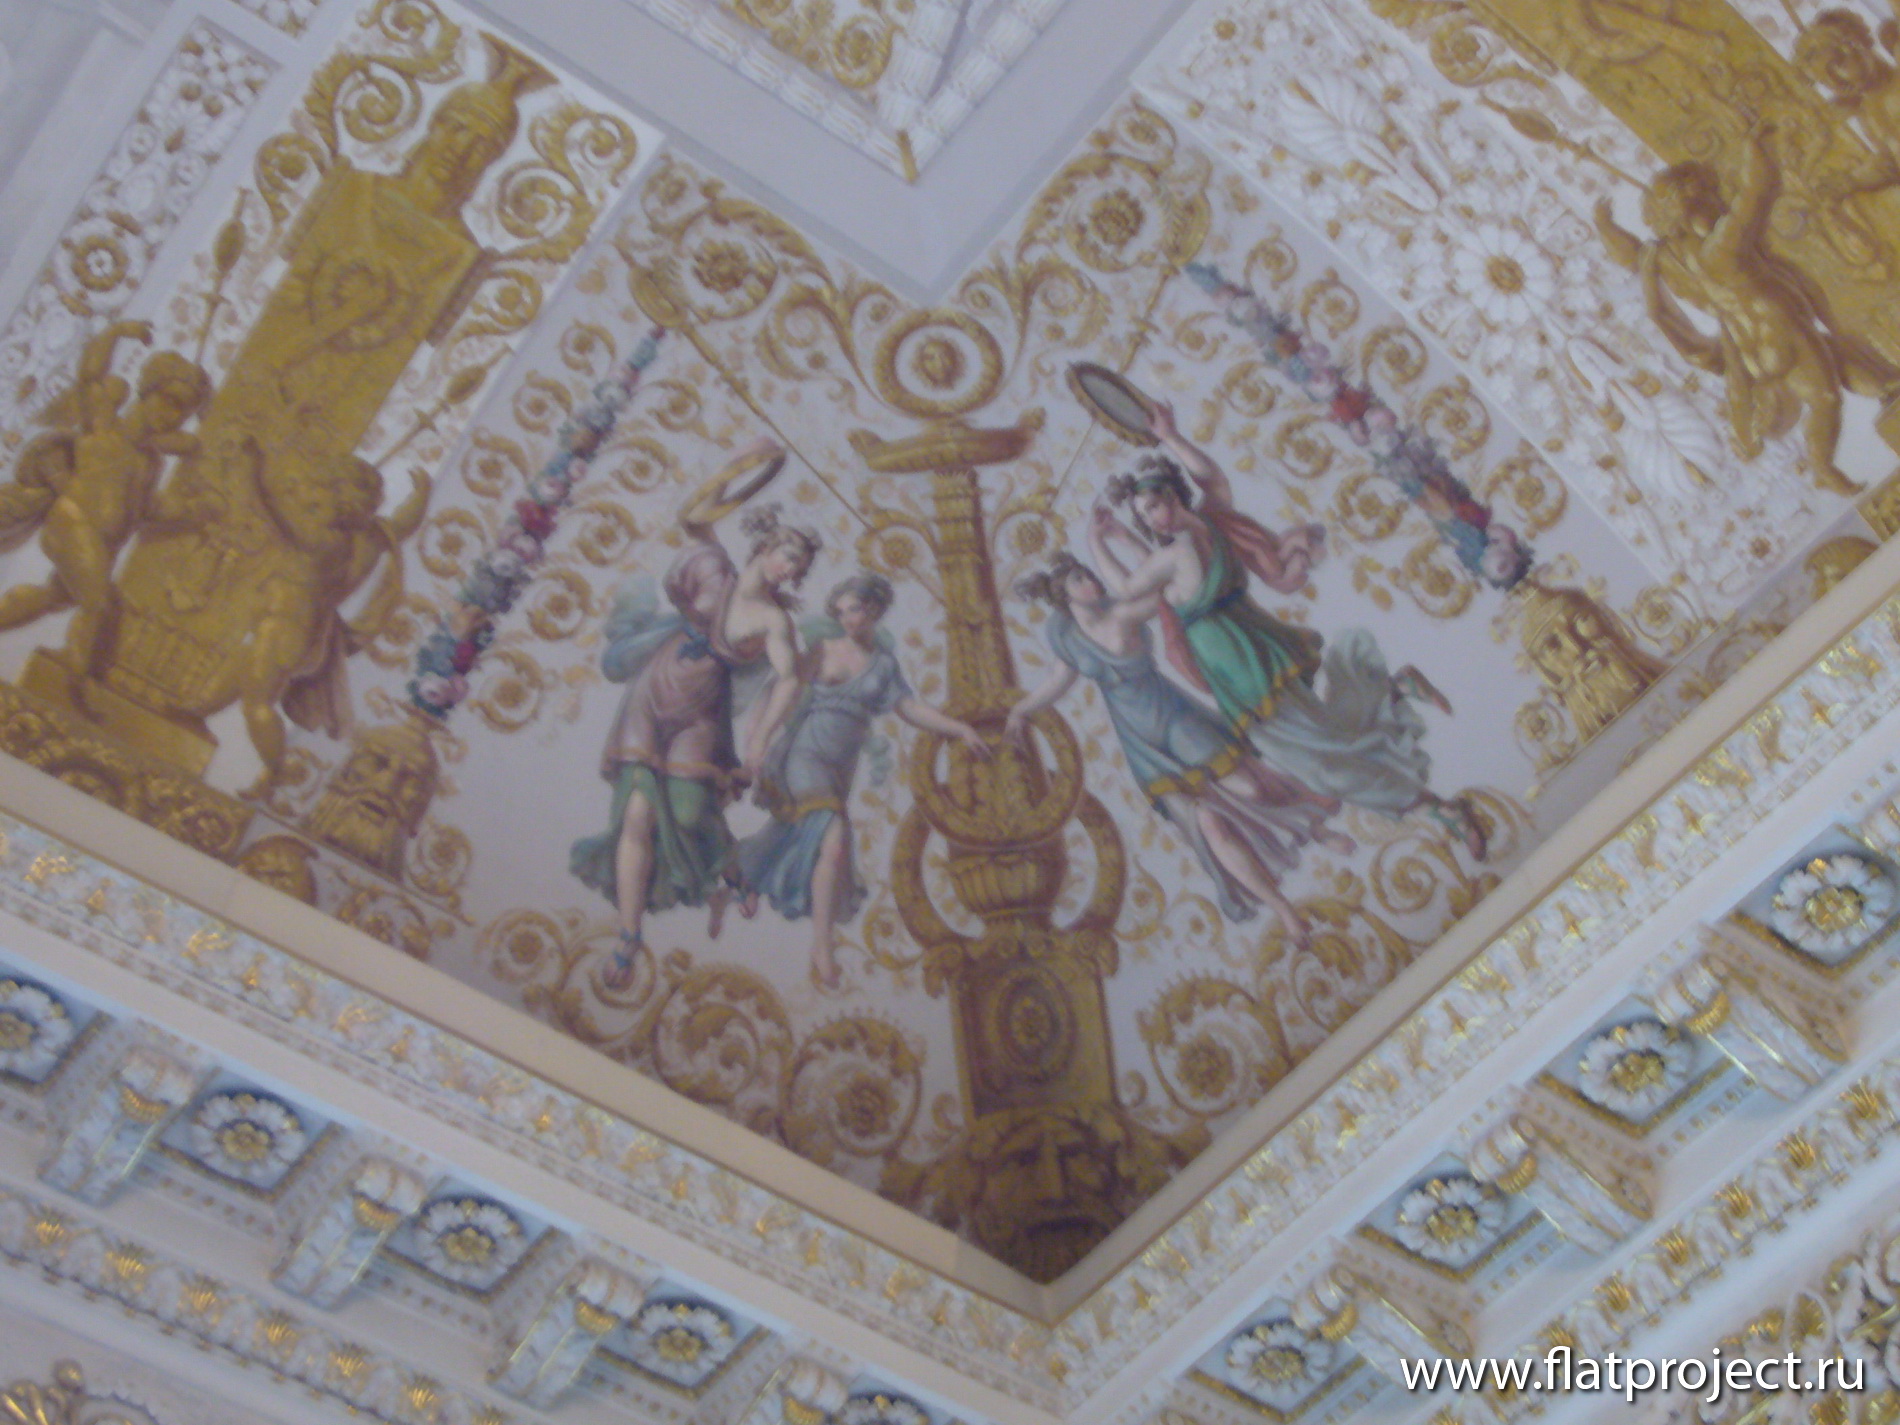 The State Russian museum interiors – photo 86